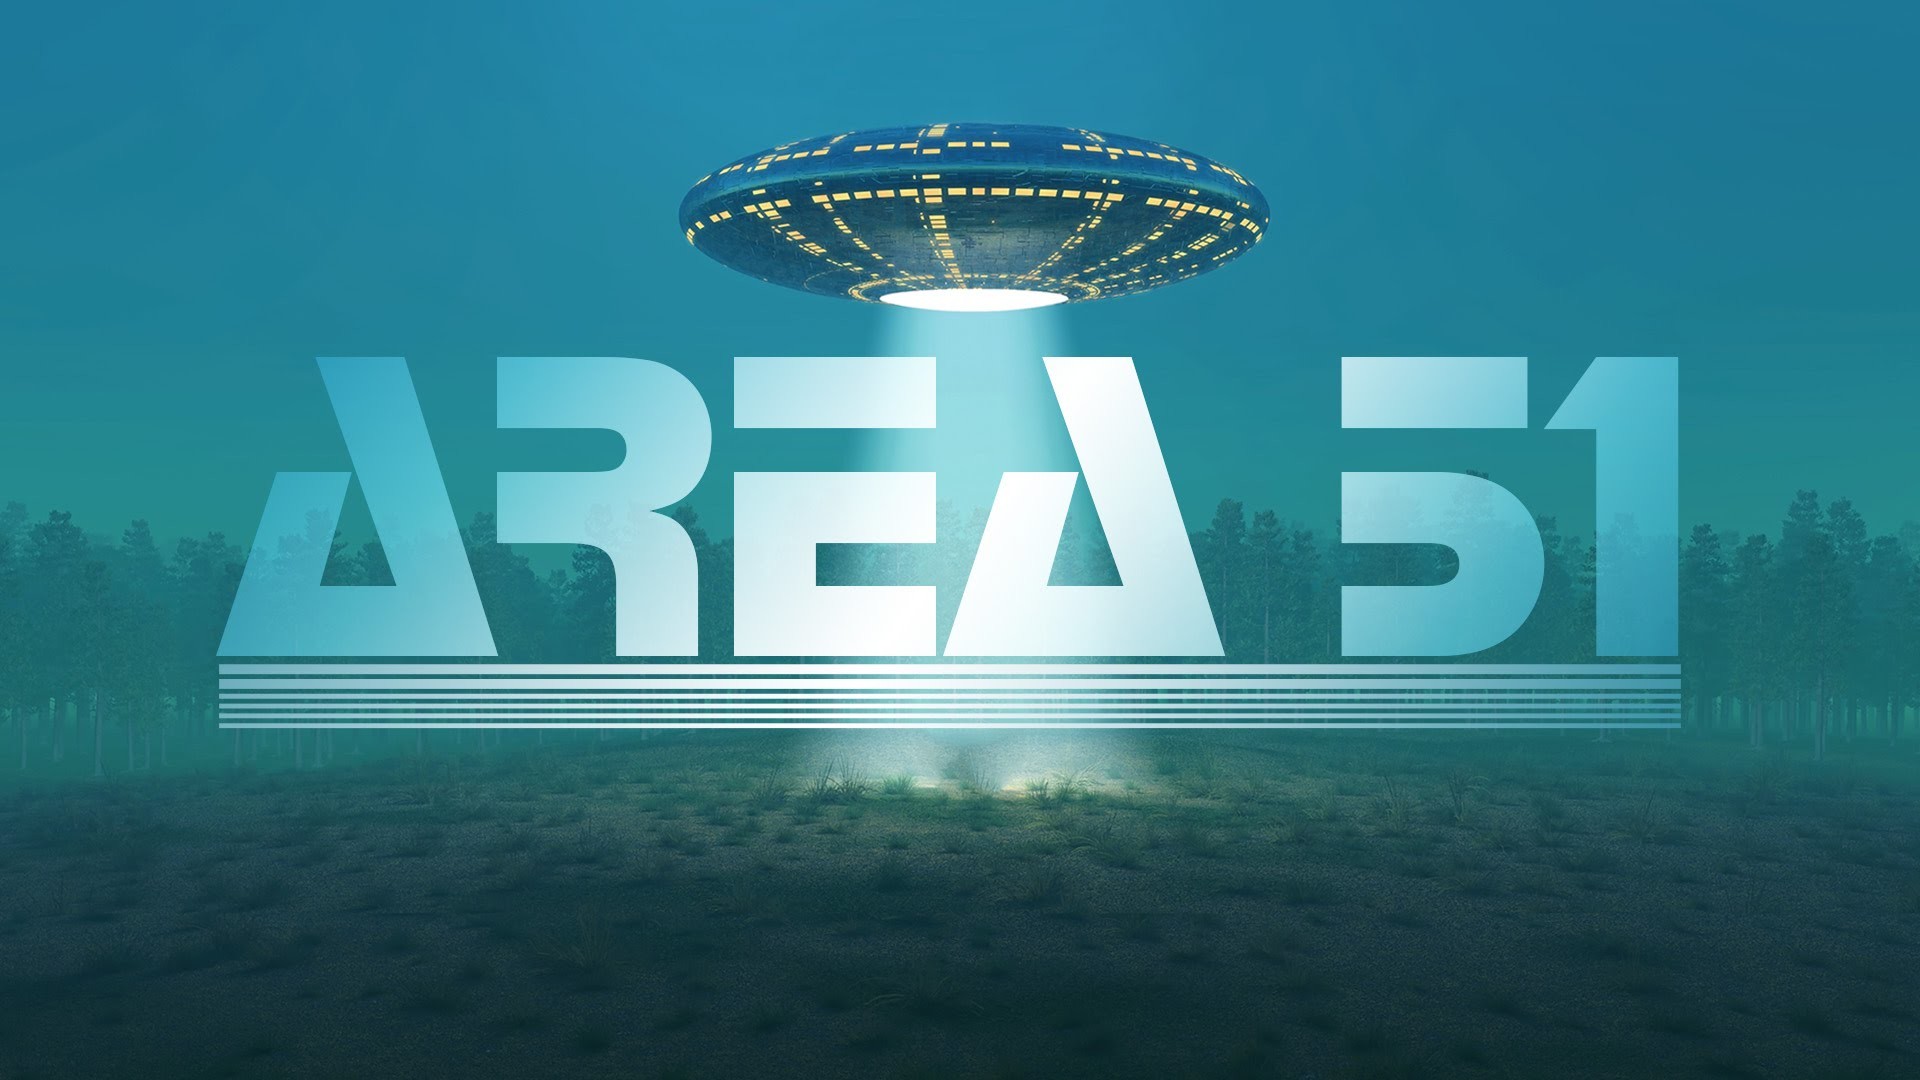 1920x1080 Area Wallpapers | HD Wallpapers | Pinterest | Area 51, Hd wallpaper and  Wallpaper